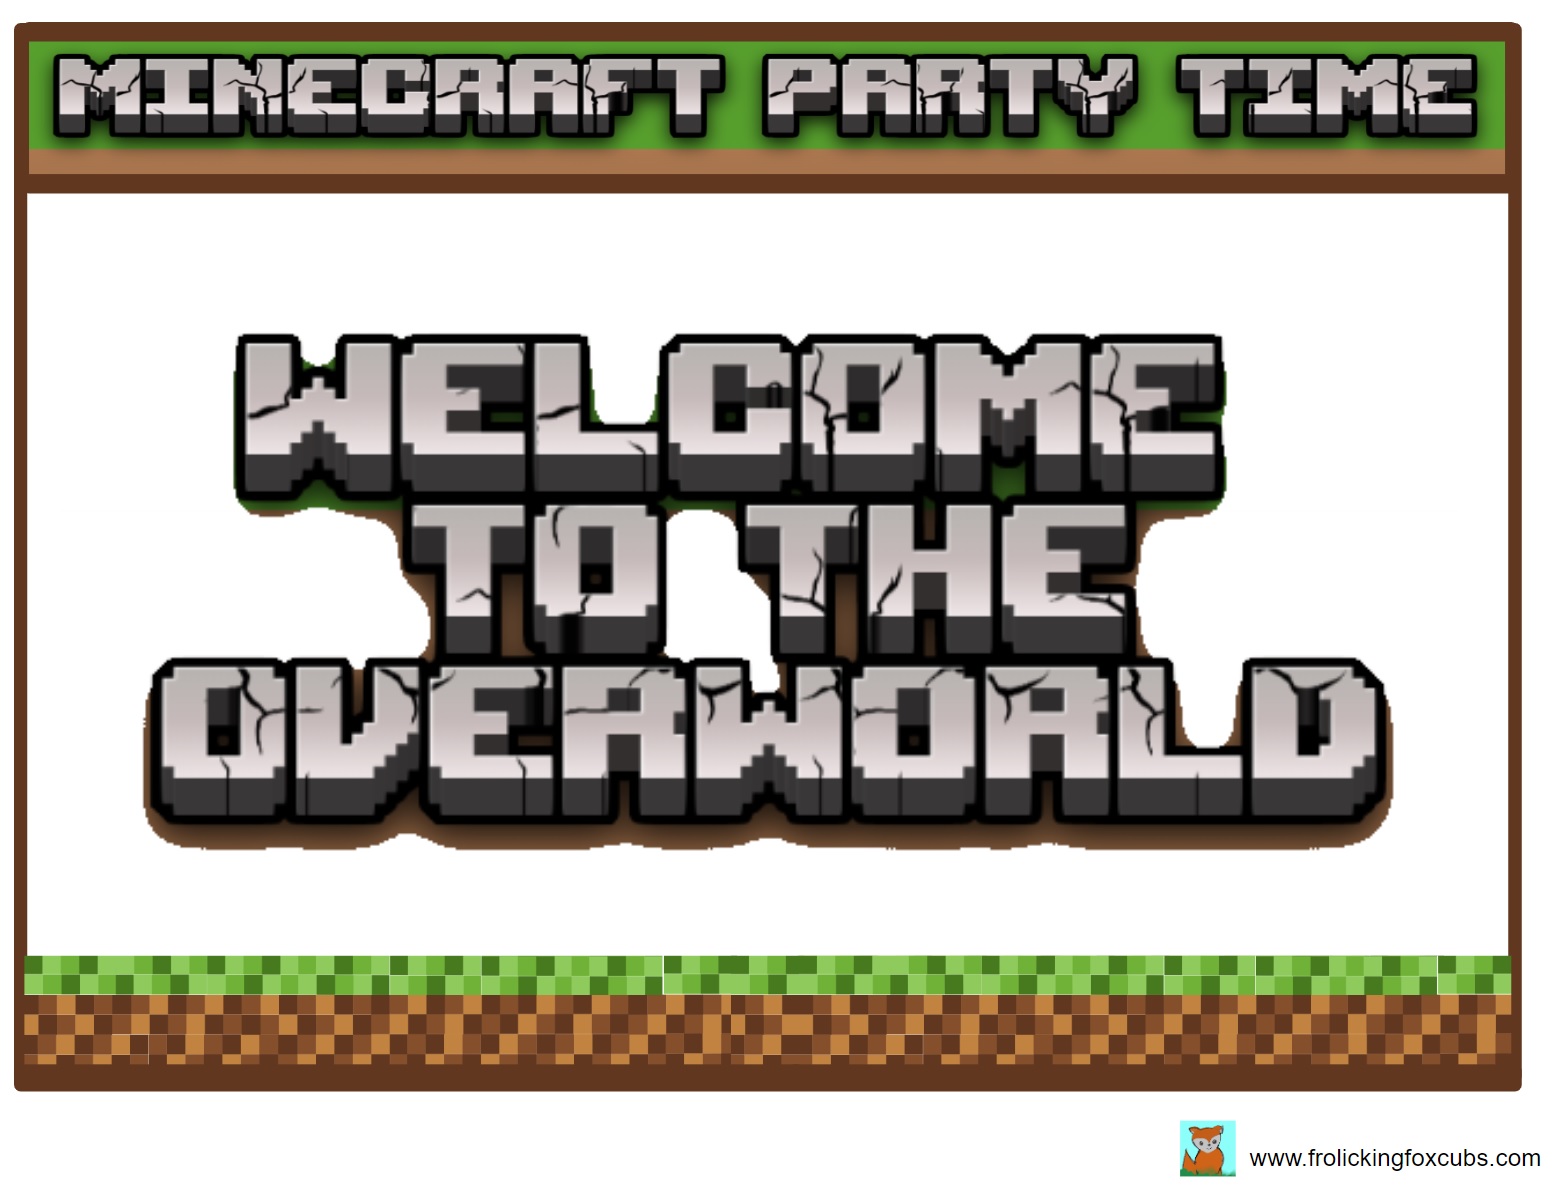 Free Printable Images for the Ultimate Minecraft Party